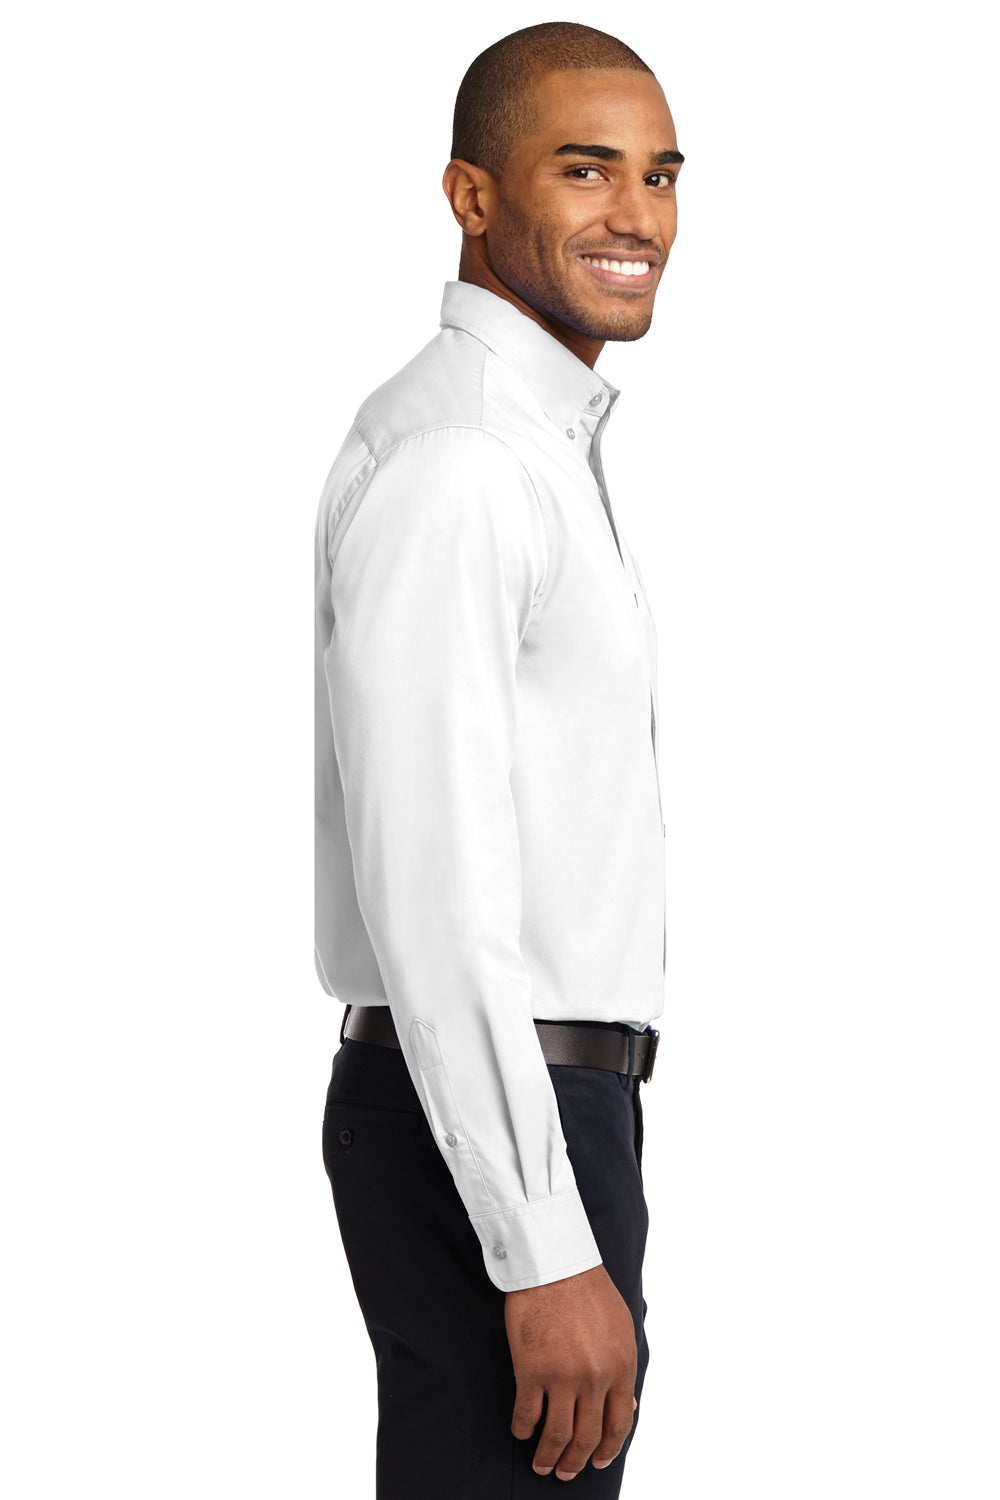 Port Authority S608/TLS608/S608ES Mens Easy Care Wrinkle Resistant Long Sleeve Button Down Shirt w/ Pocket White Side